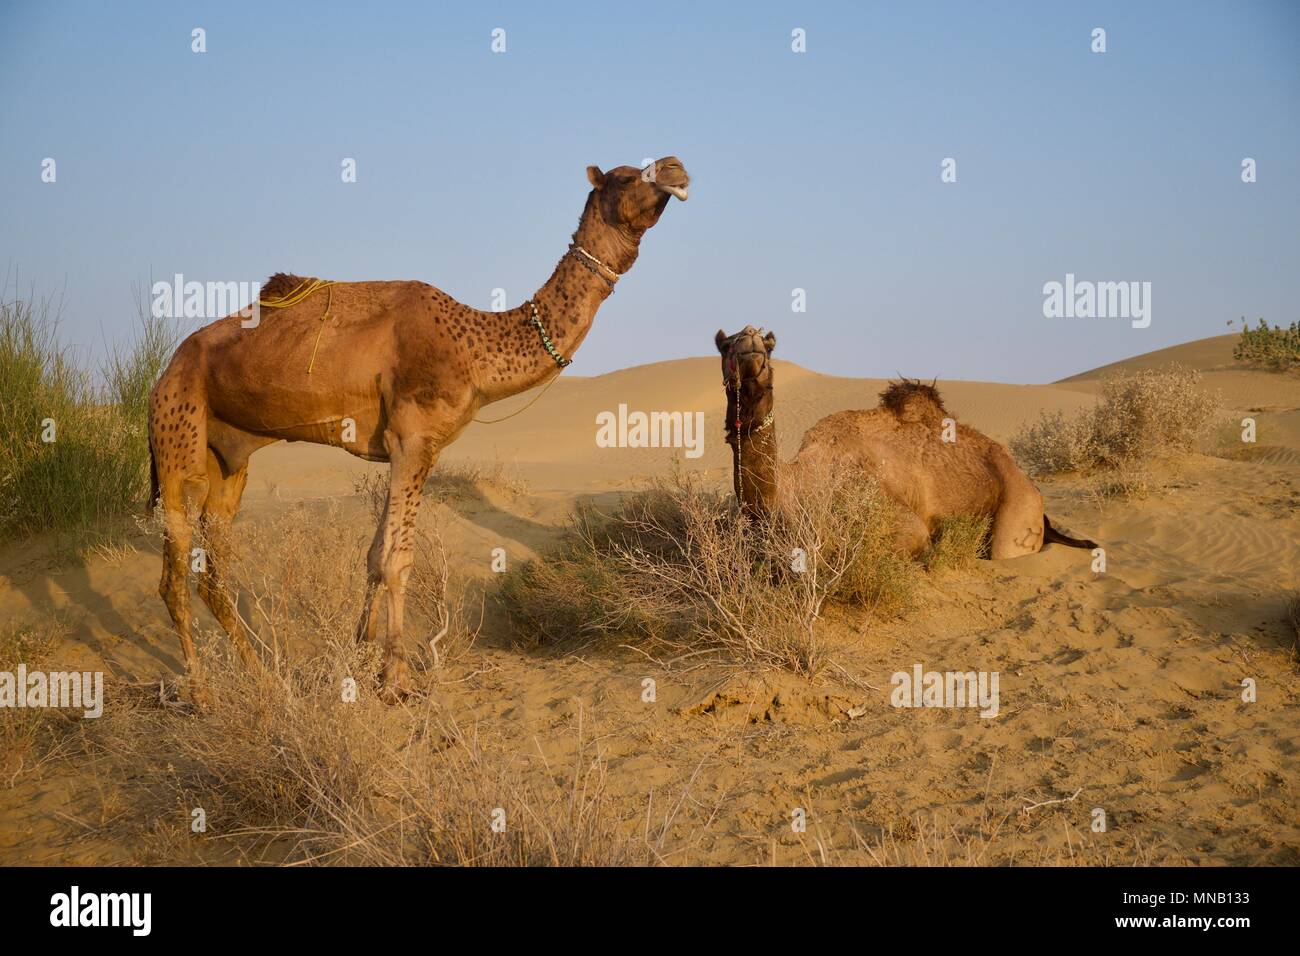 Camels in Thar Desert, Rajasthan, India Stock Photo - Alamy